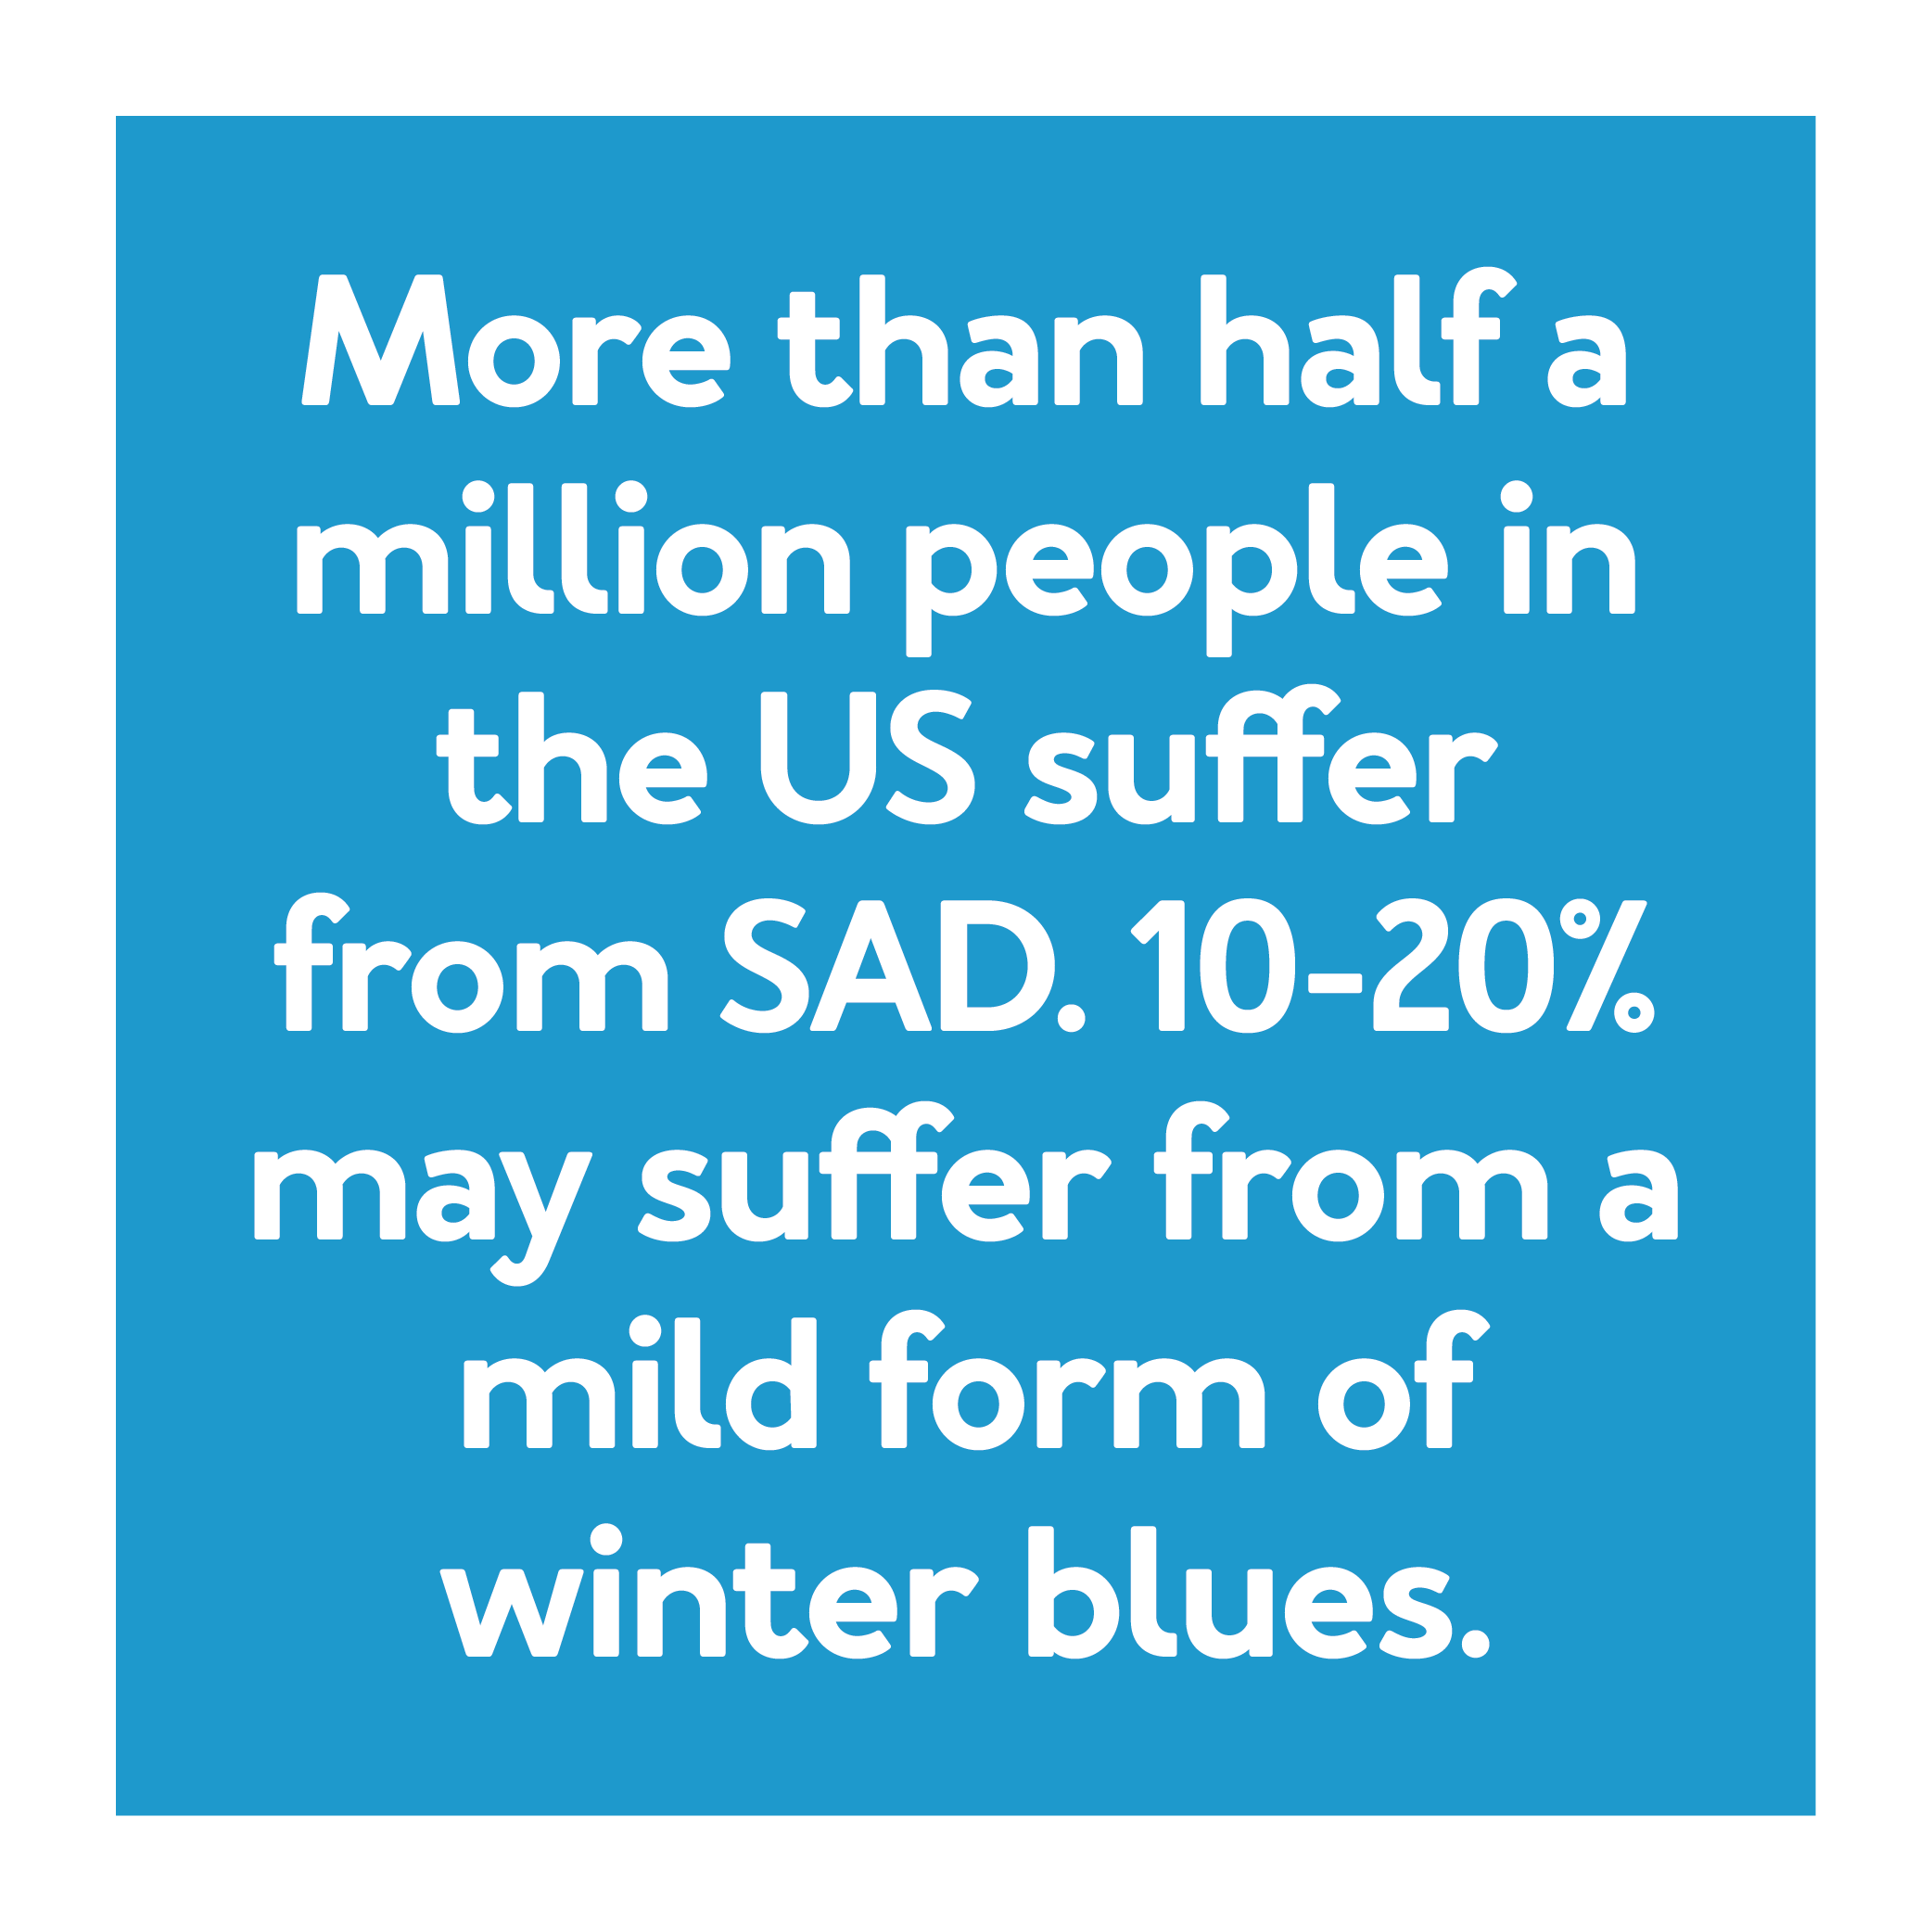 More than half a million people in the U.S. suffer from SAD. 10-20% may suffer from a mild form of winter blues 